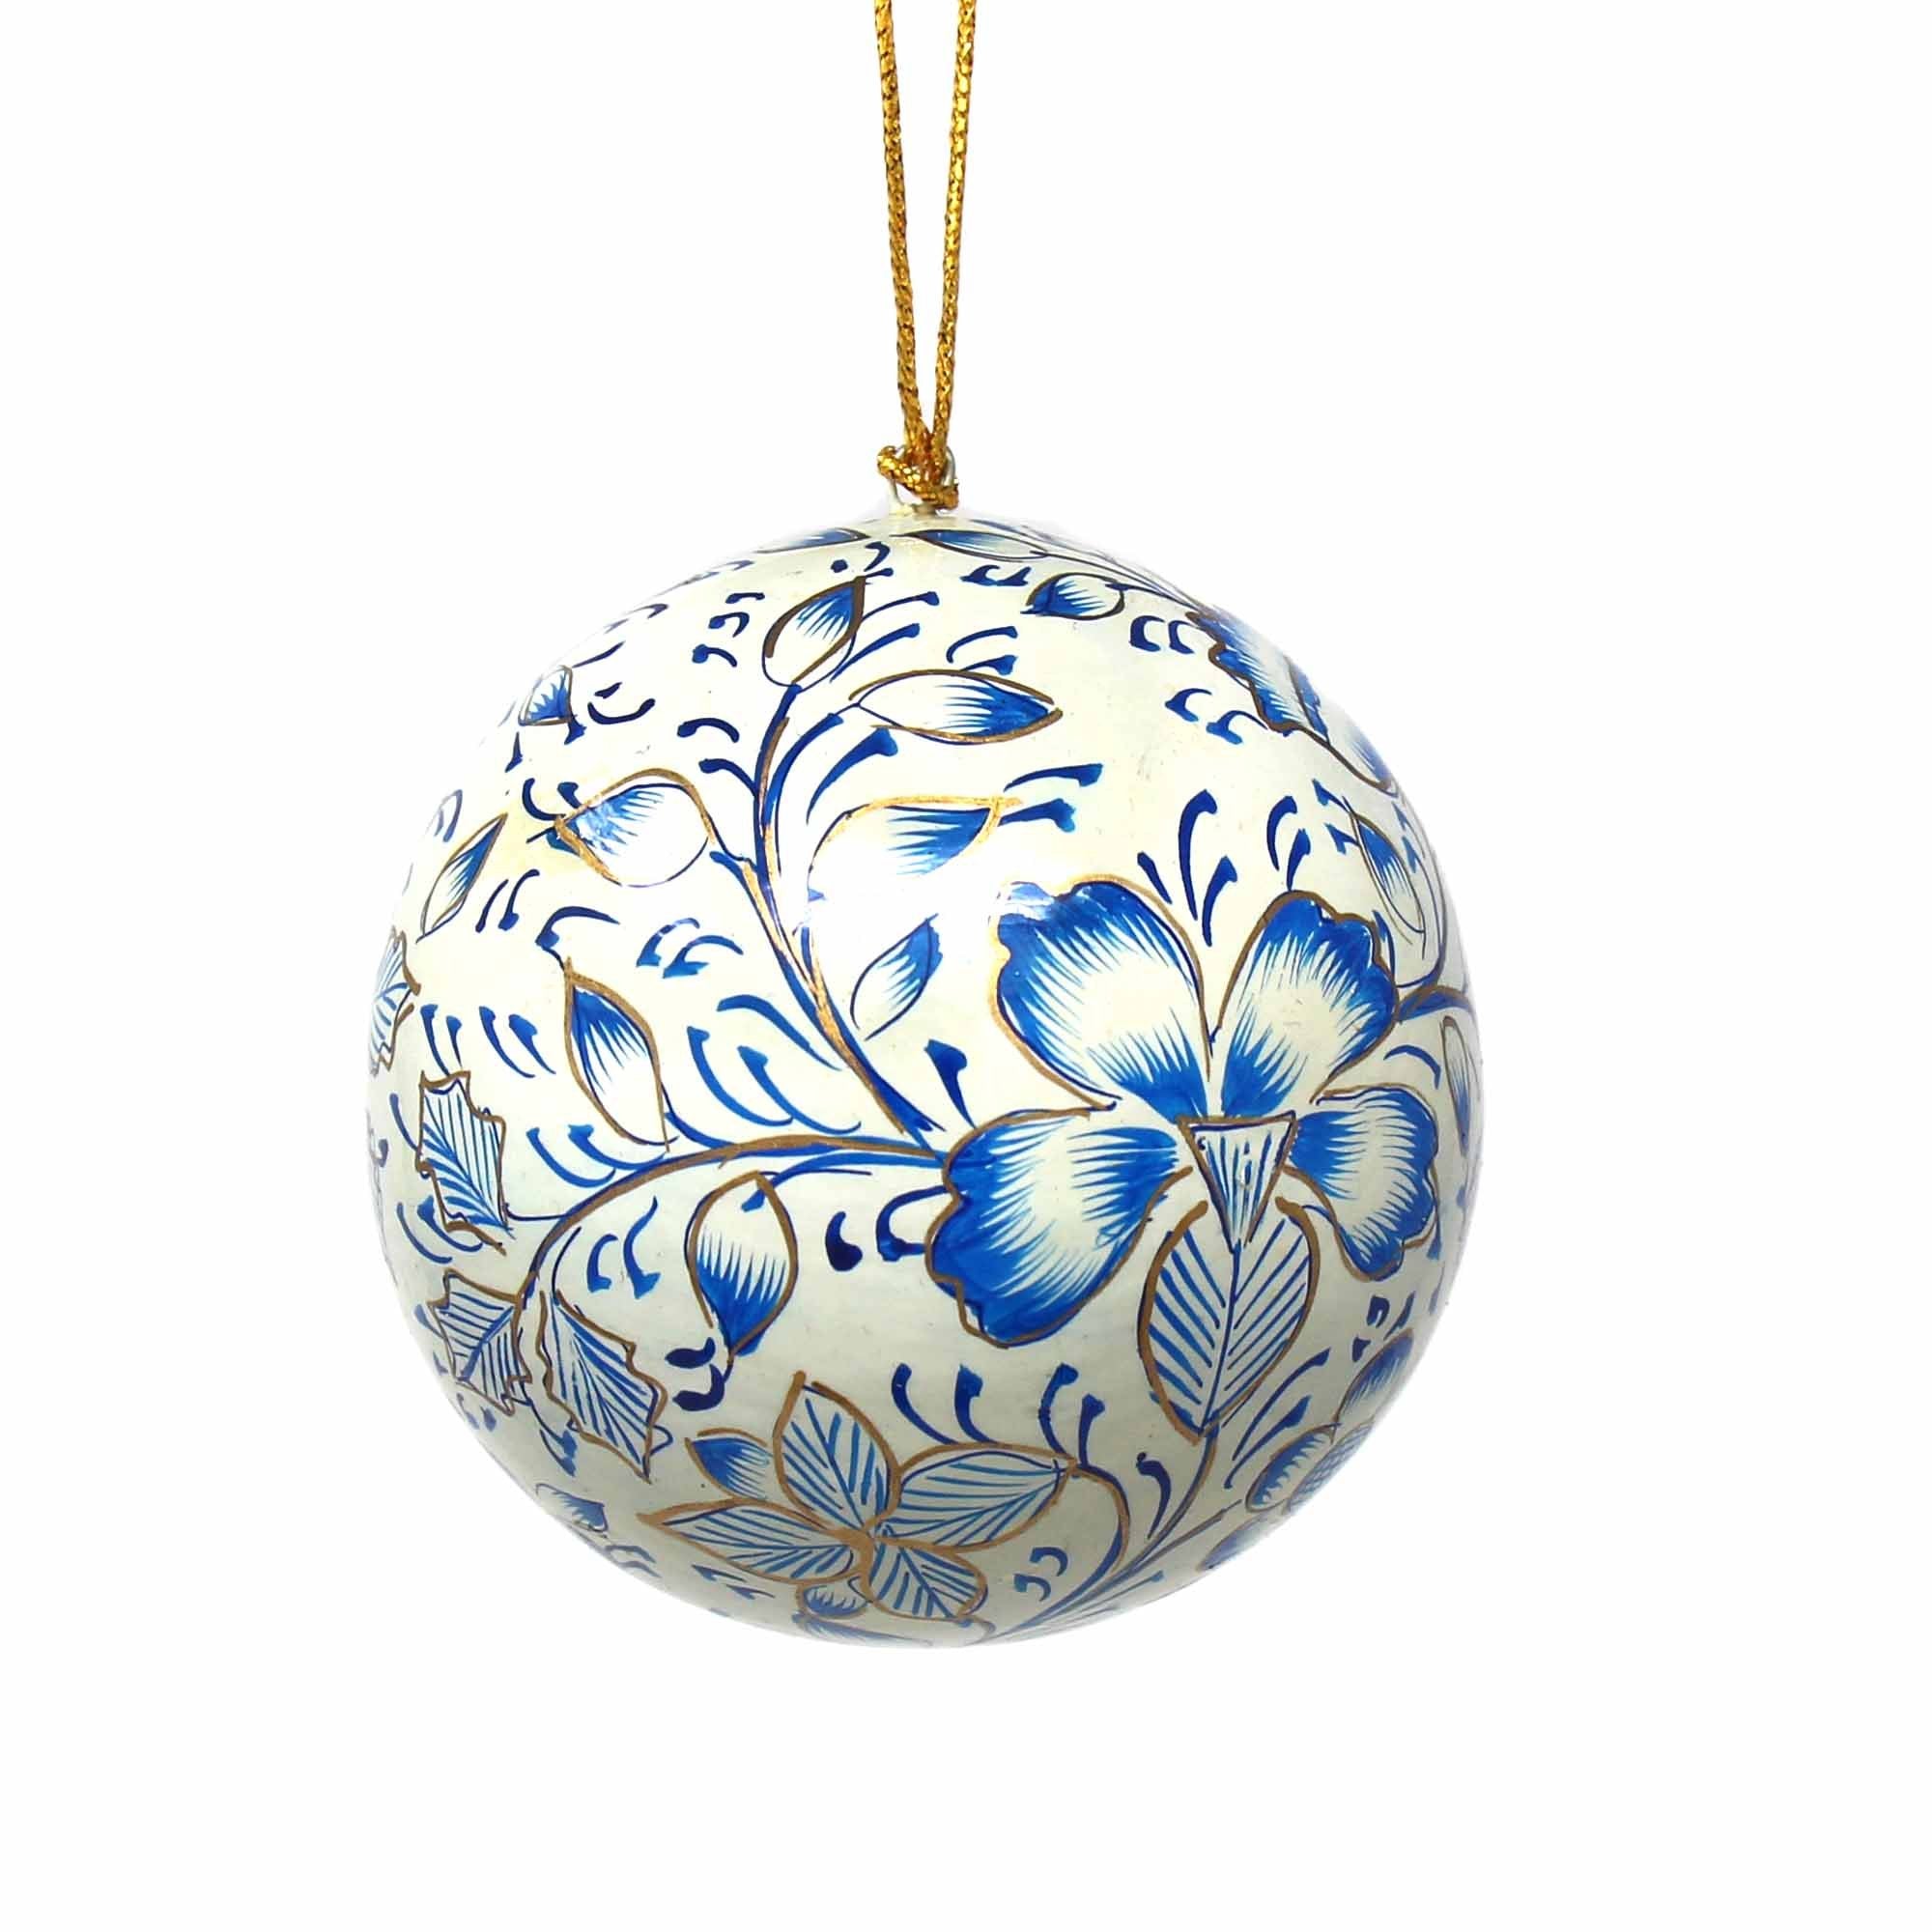 Handpainted Light Grey and Blue Floral Papier Mache Hanging Ball Ornament